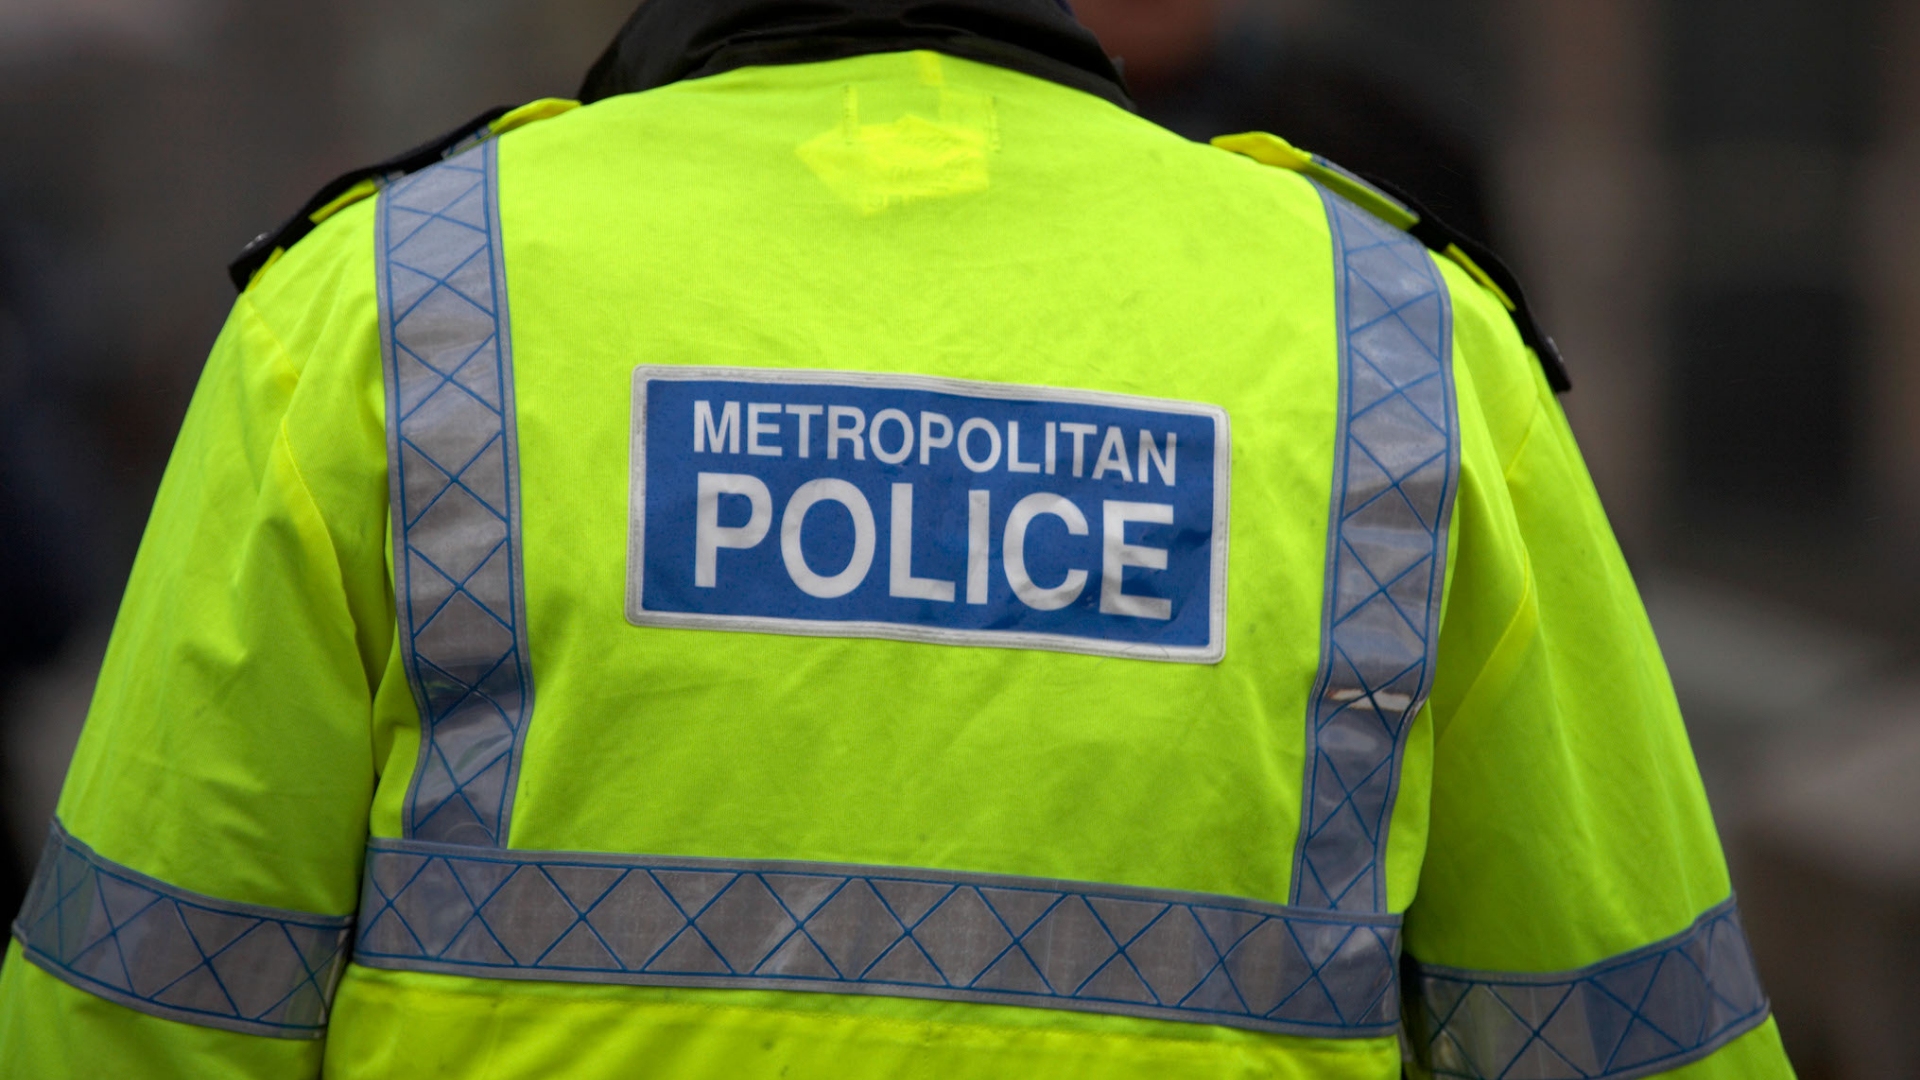 The home secretary had already been scheduled to meet with the Met Police chief.